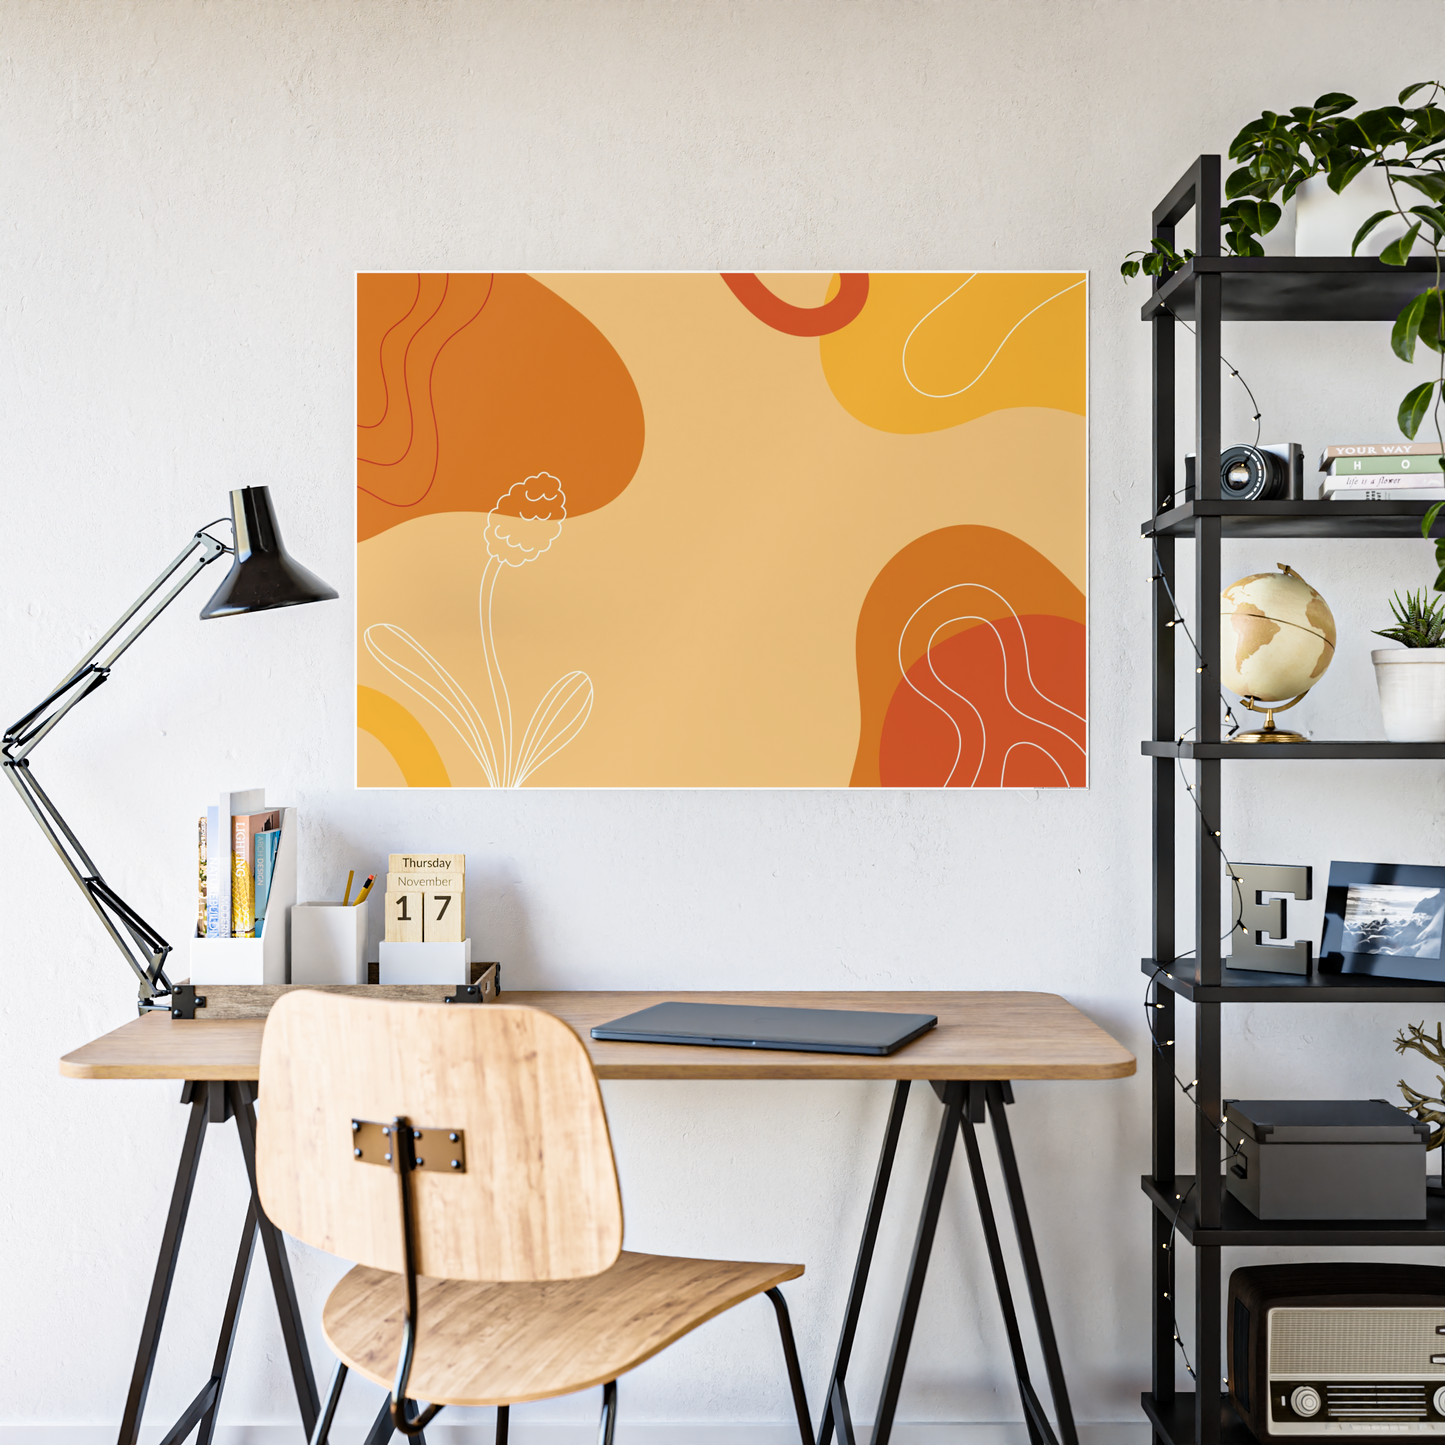 Bold and Minimal: Framed Canvas Art for a Striking Wall Display